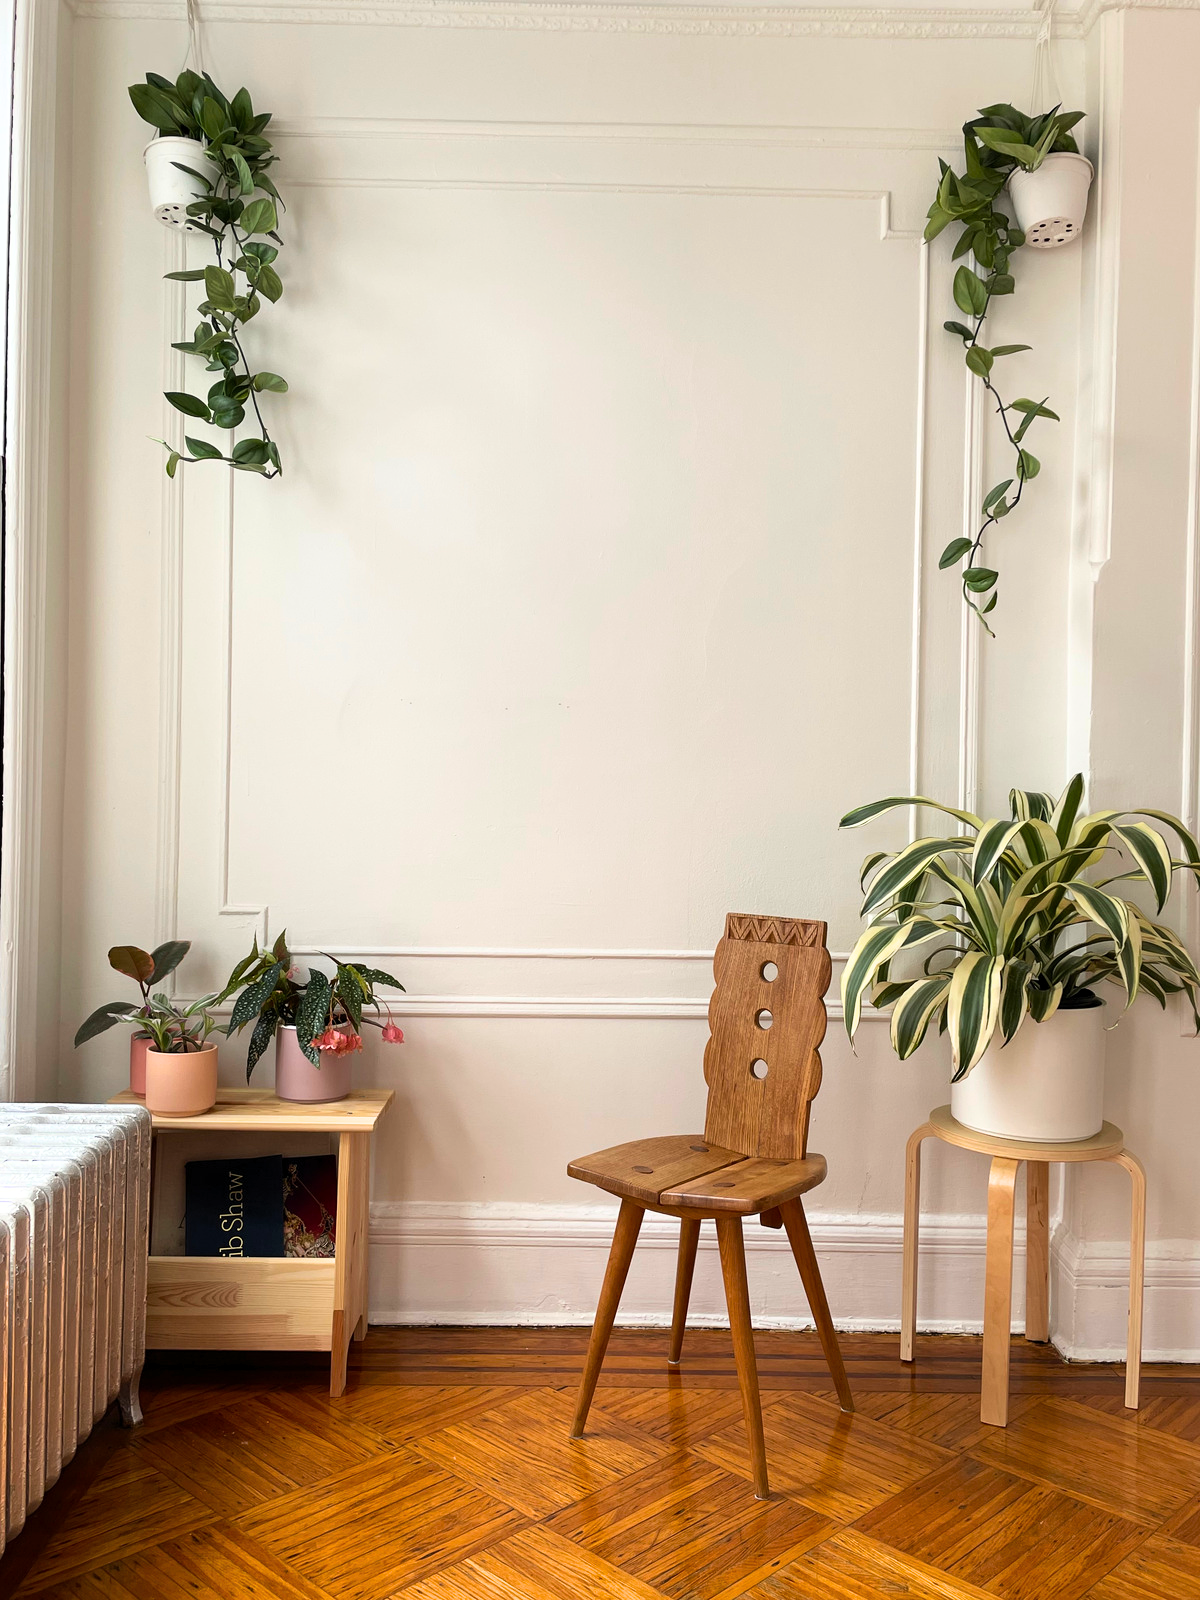 Reading nook with molding on cream white wall, aesthetic and rustic wood chair, dracaena on stool in white pot, various smaller colorful plants including variegated rubber plant in pastel pink and purple pots at left, and two trailing, vining plants on either side at top. Sunlit space.